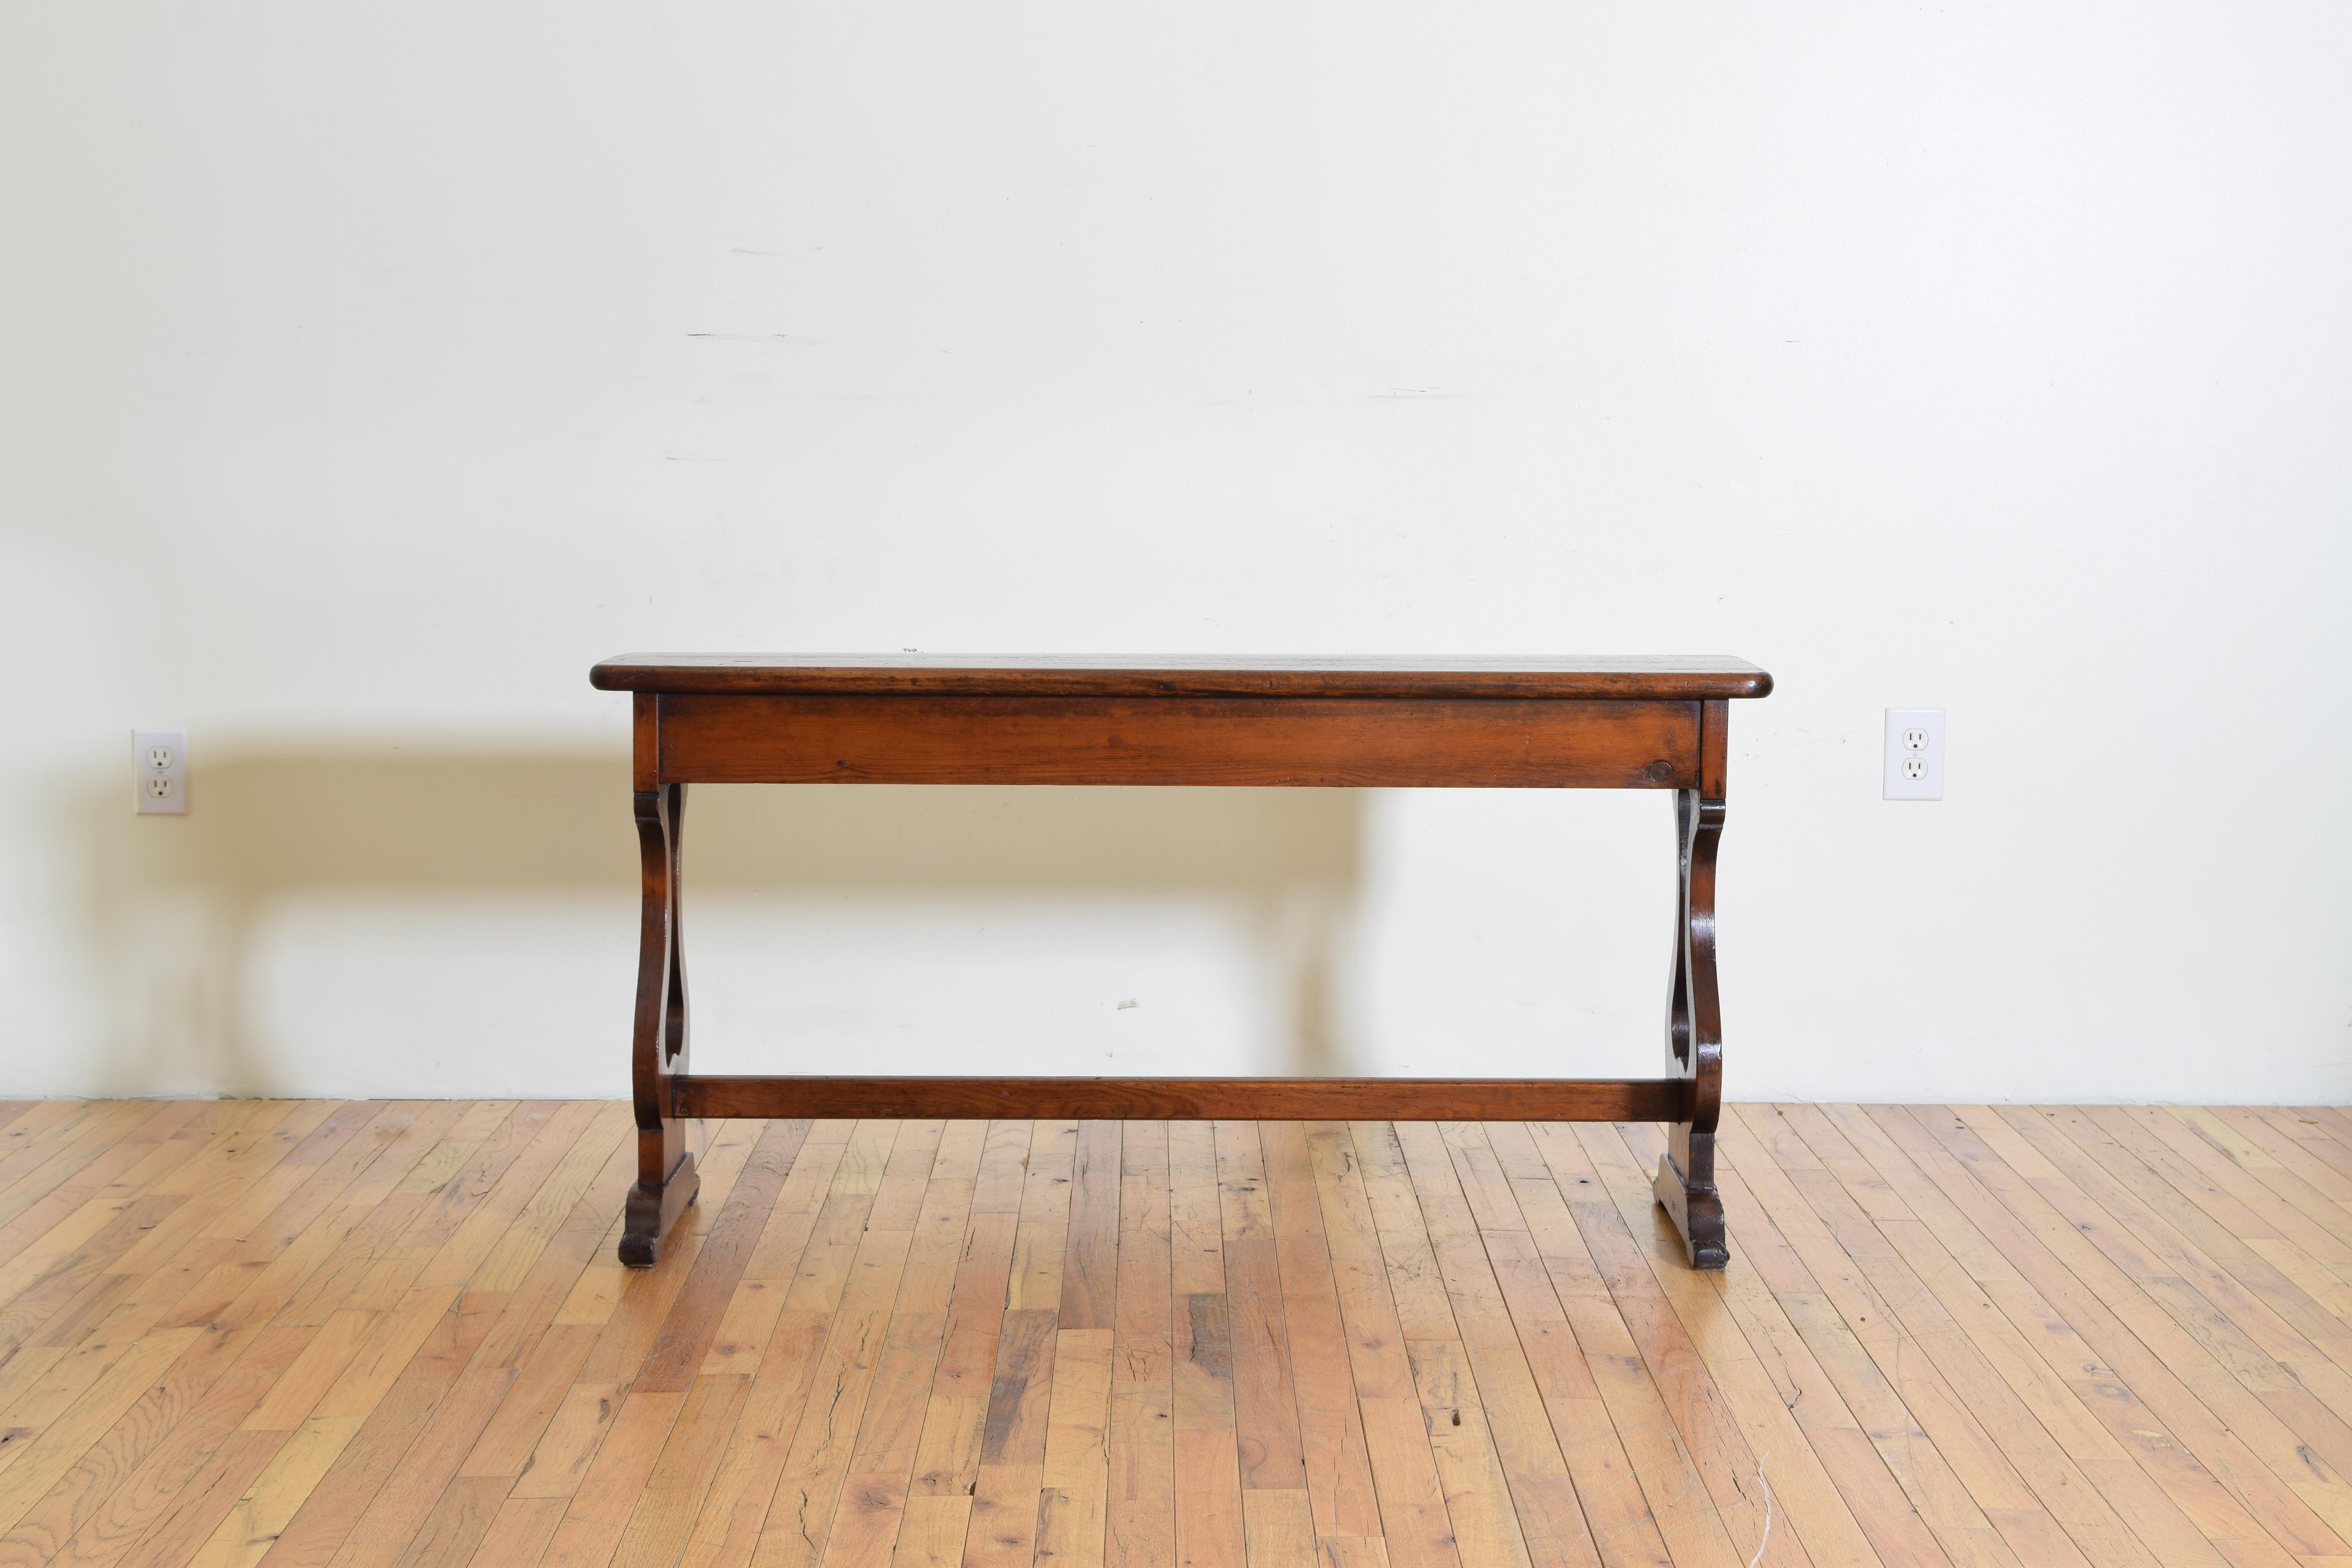 Neoclassical Revival French Neoclassic Shaped Oak Bench, Second Half of the 19th Century